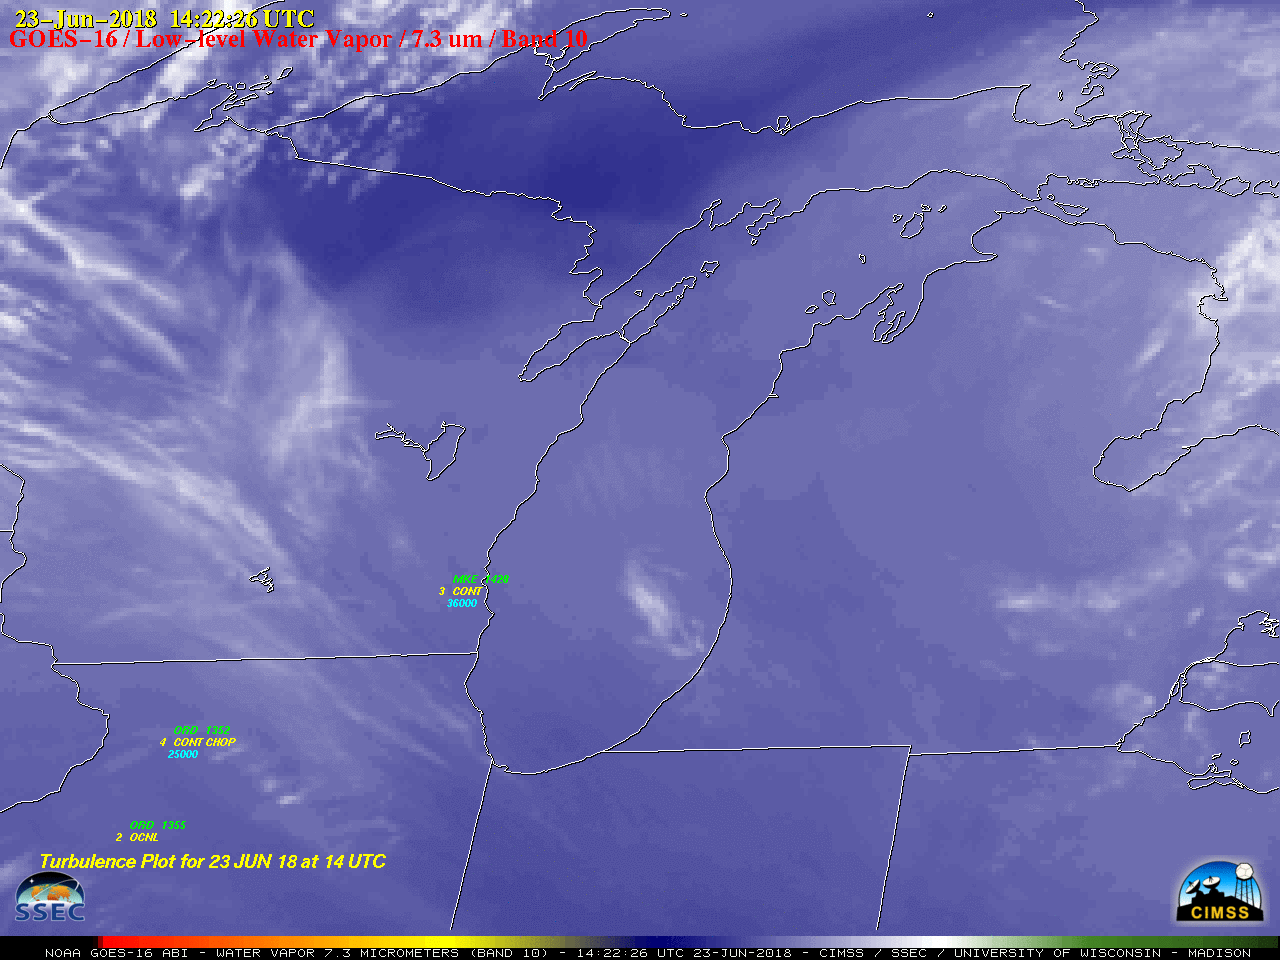 GOES-16 Low-level (7.3 µm) images, with hourly pilot reports of turbulence [click to play animation]